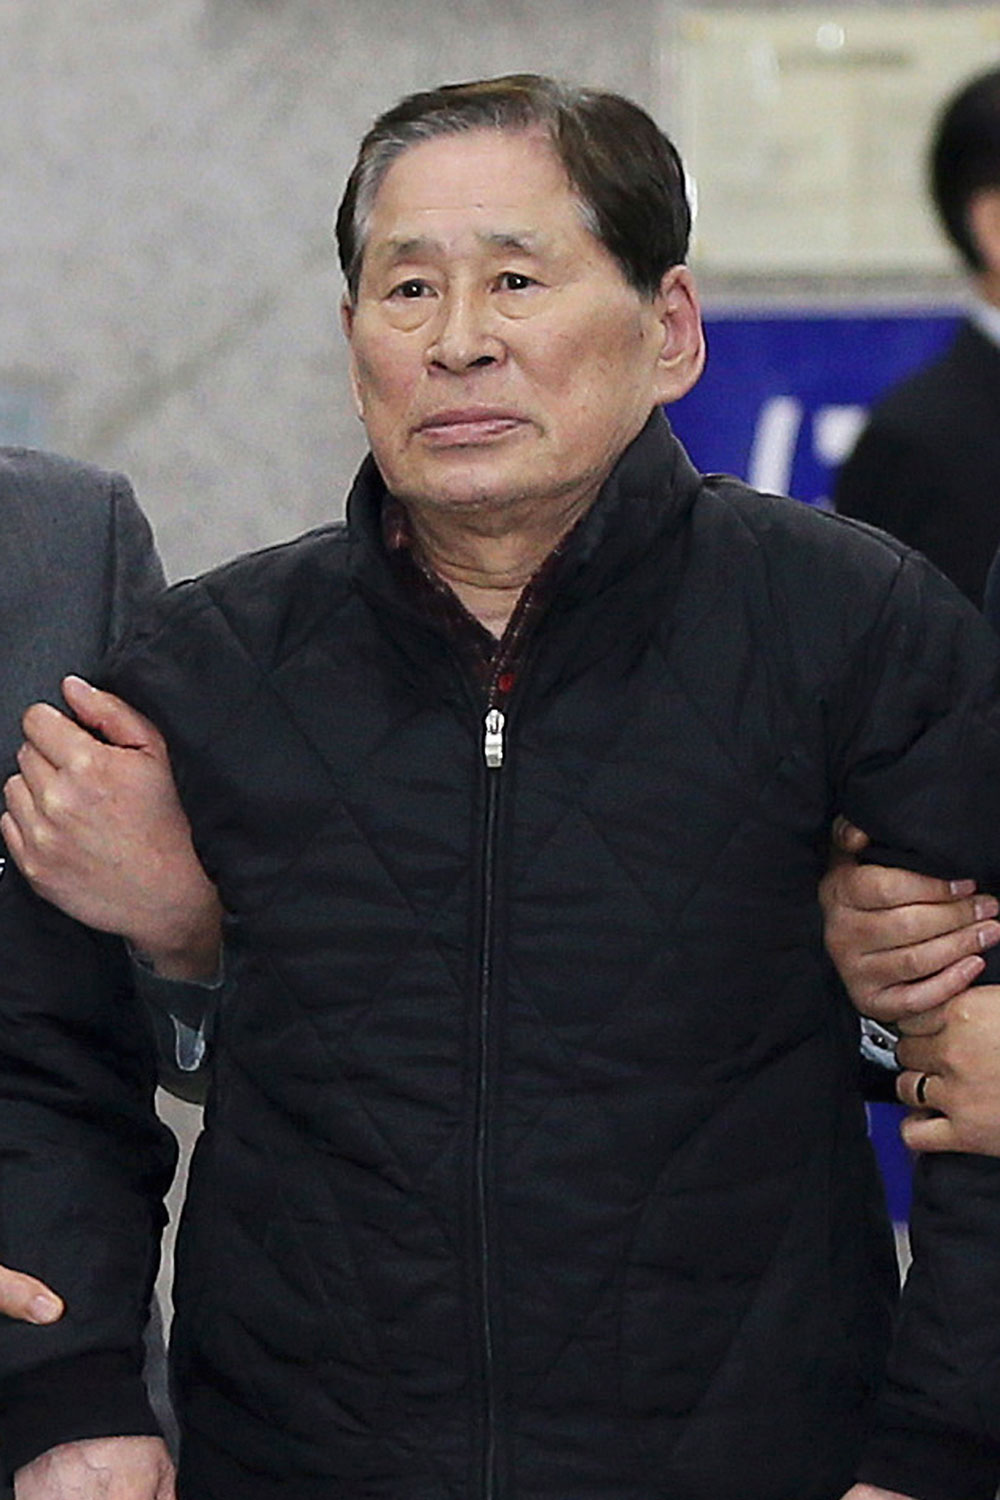 Kim Han-sik, president of Chonghaejin, is escorted by helpers to hold a press conference at Incheon Port International Passenger Terminal in Incheon, South Korea on April 17, 2014. (Yonhap/AP)